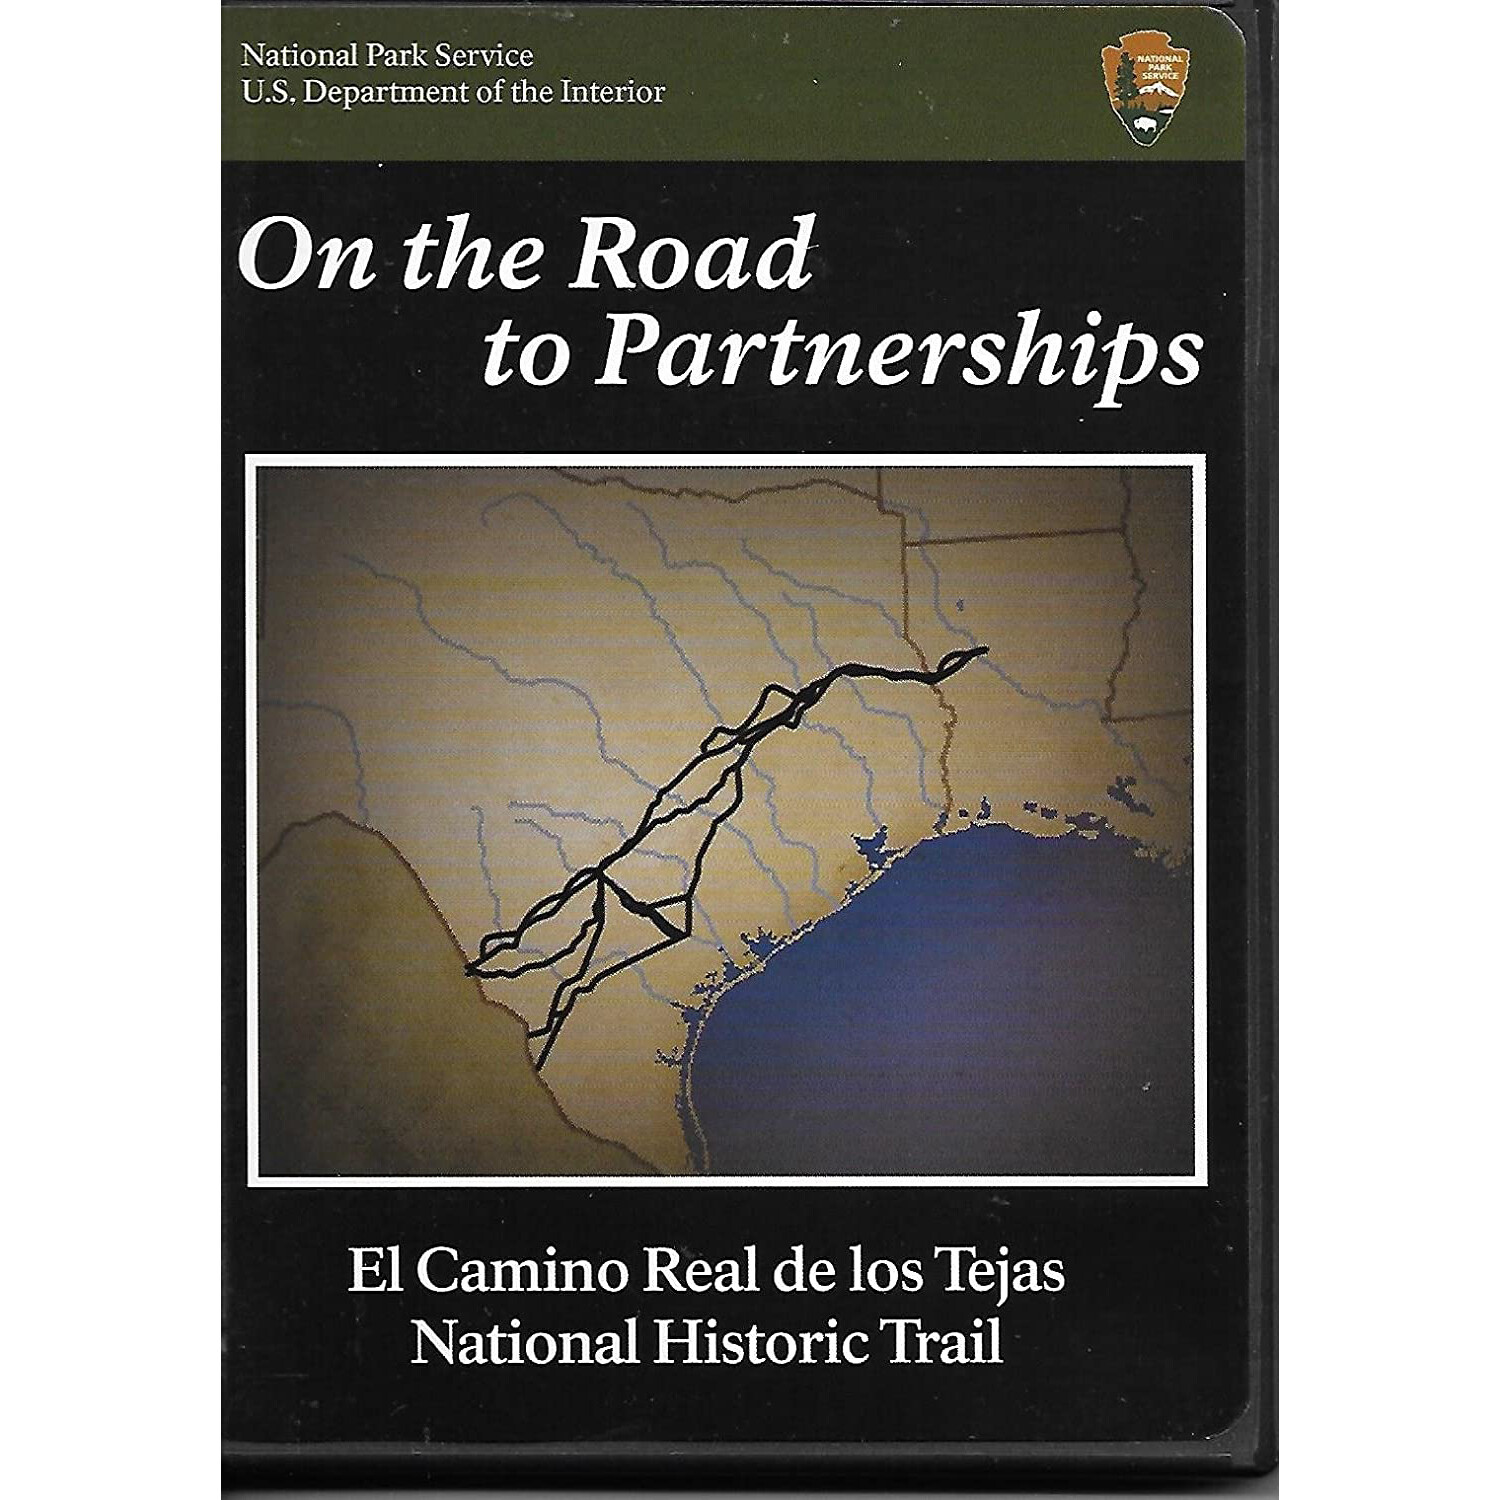 "On the Road to Partnerships" DVD